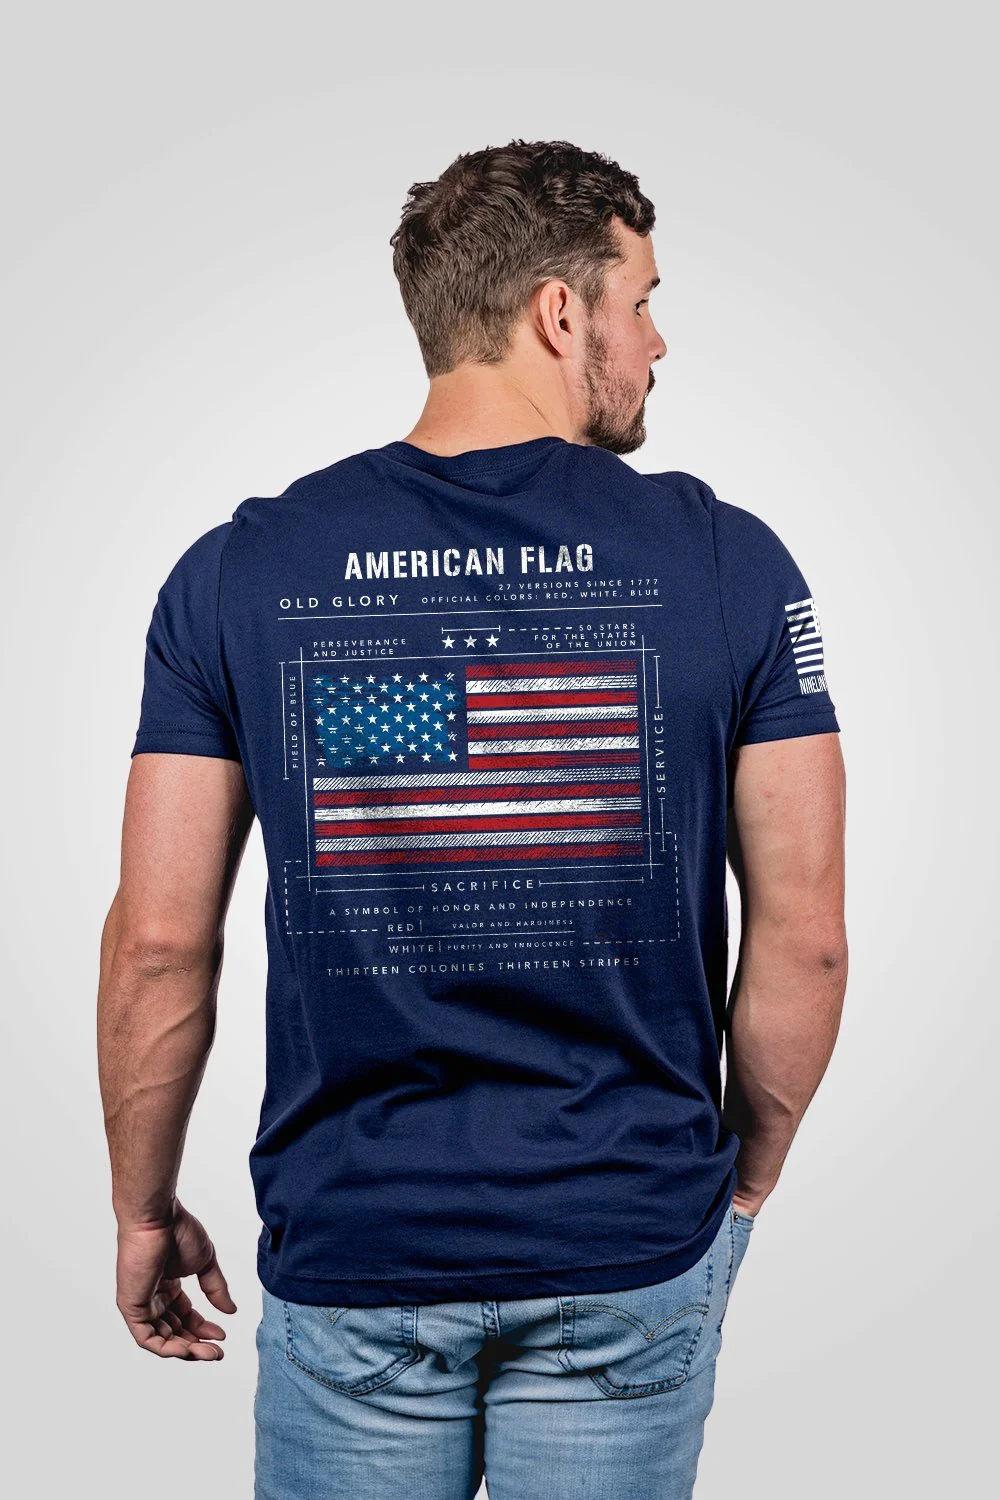 Nine Line Men's American Flag Schematic T-Shirt posted by ProdOrigin USA in Men's Apparel